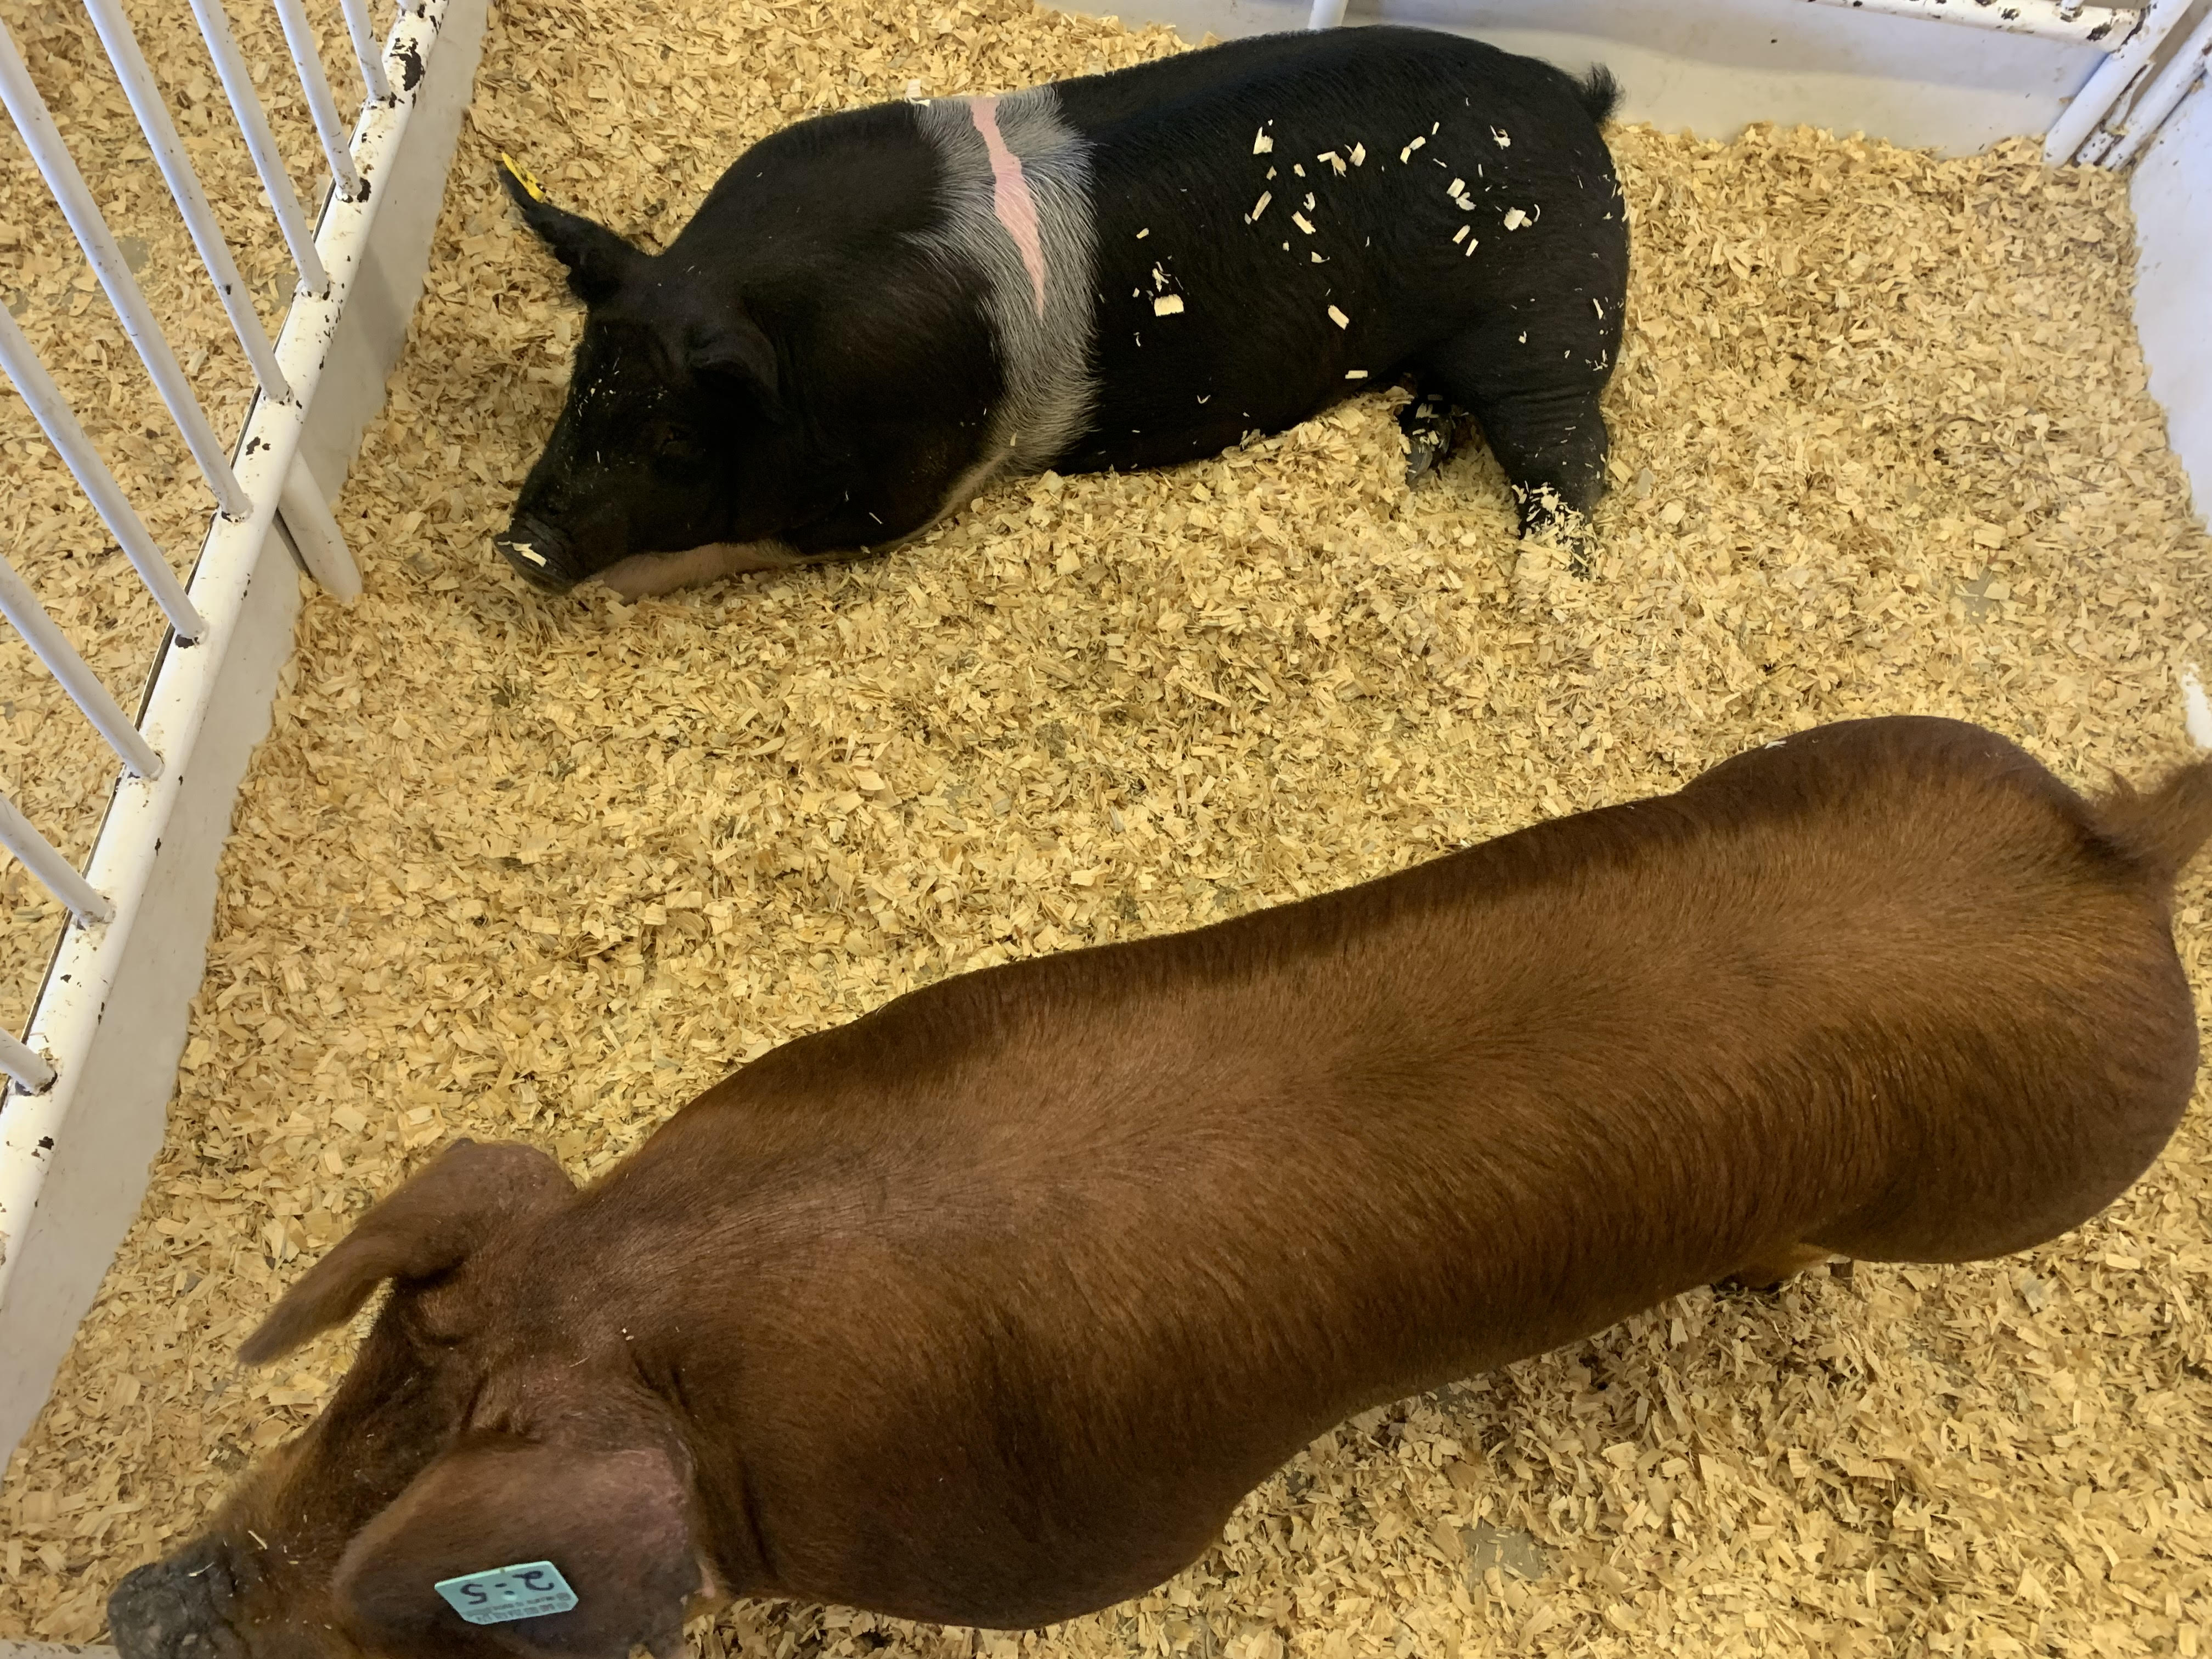 Afternoon Ag News, October 4, 2021: Labor shortages continue in the U.S. pork processing industry